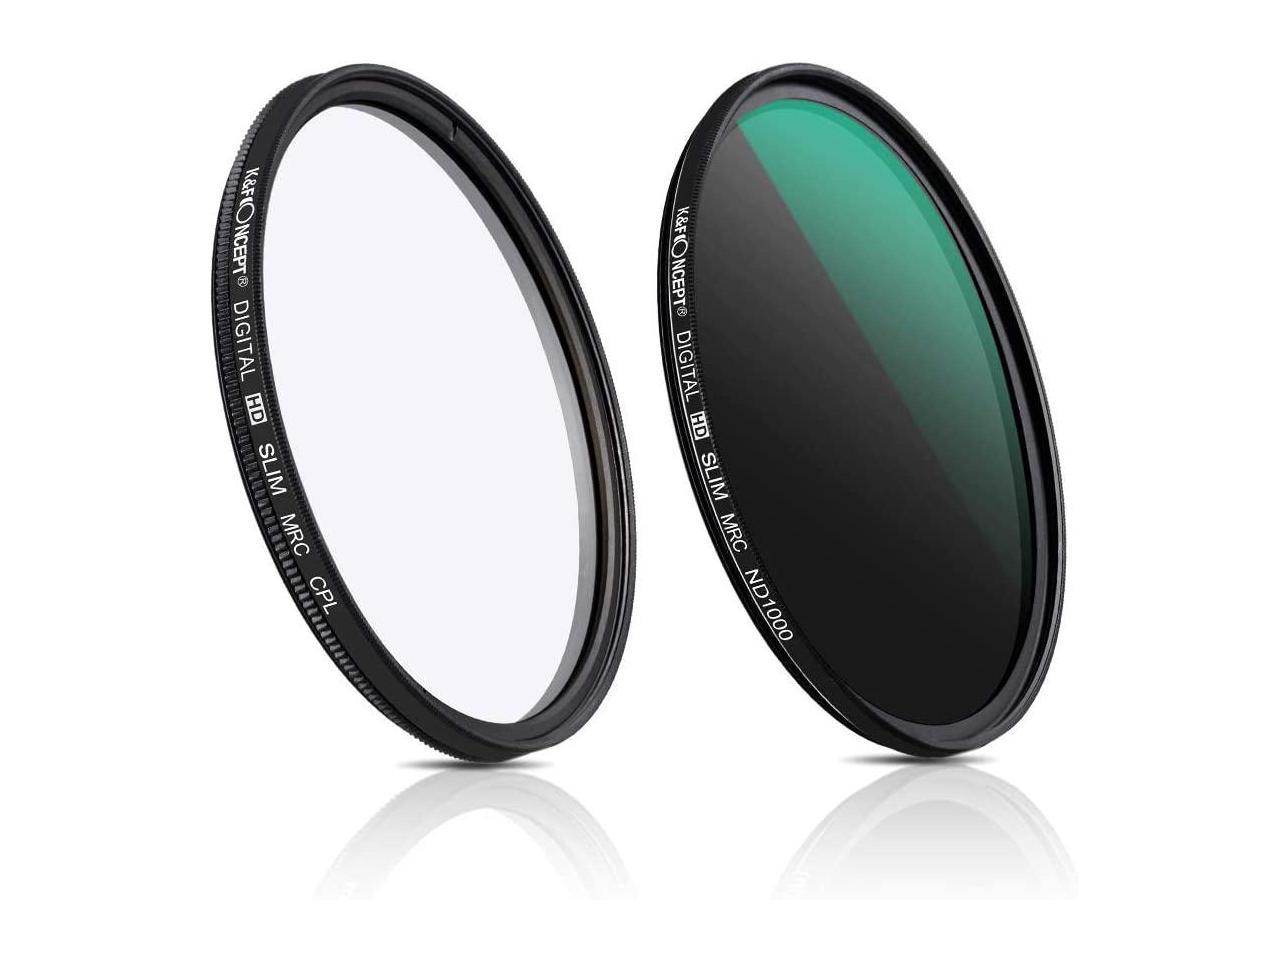 ND1000 for Sony Alpha NEX-5 72mm NDX Variable Range Neutral Density Fader Filter Adjustable from ND2